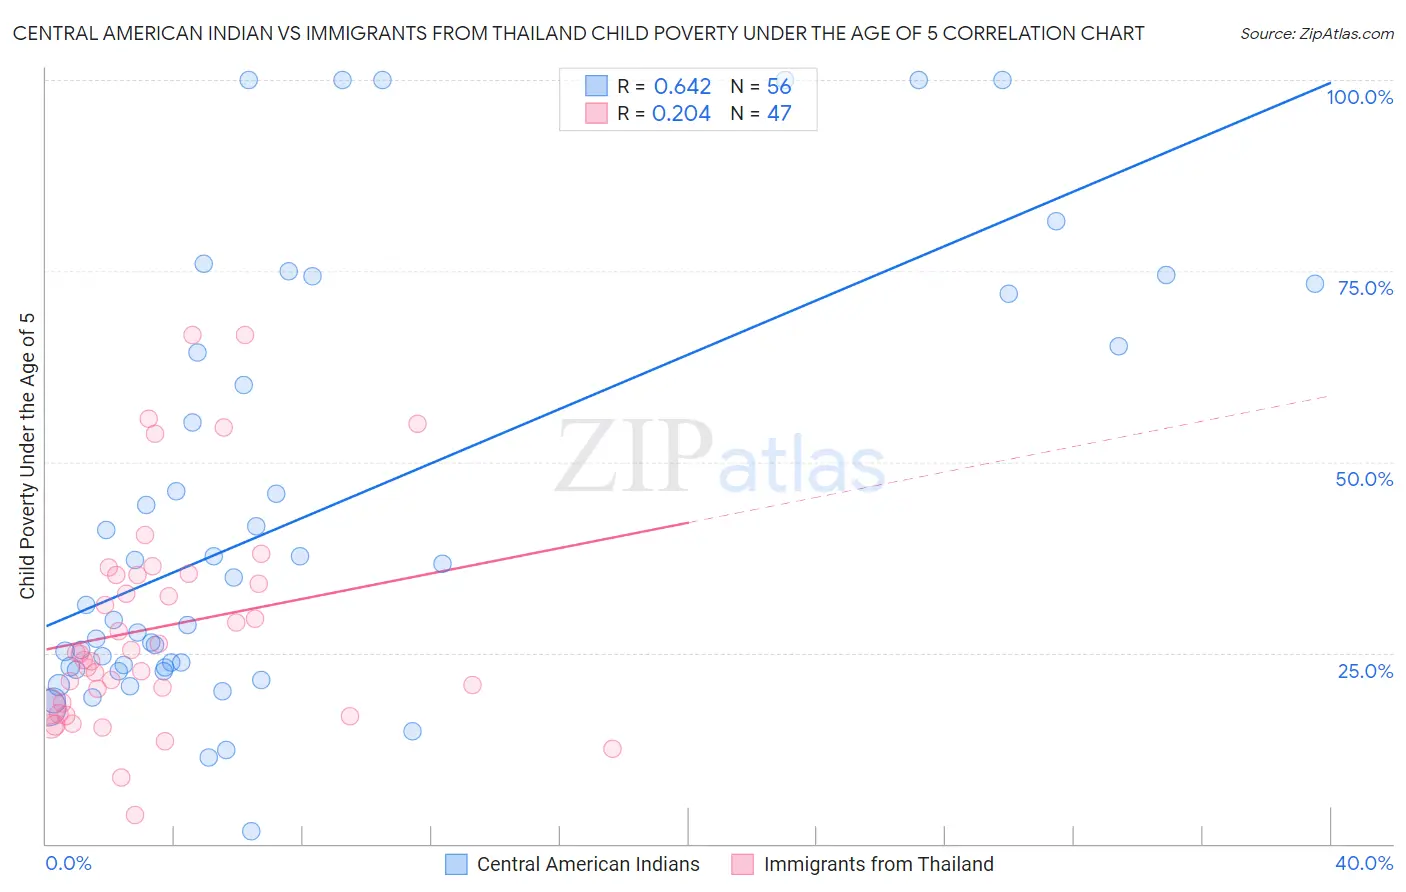 Central American Indian vs Immigrants from Thailand Child Poverty Under the Age of 5